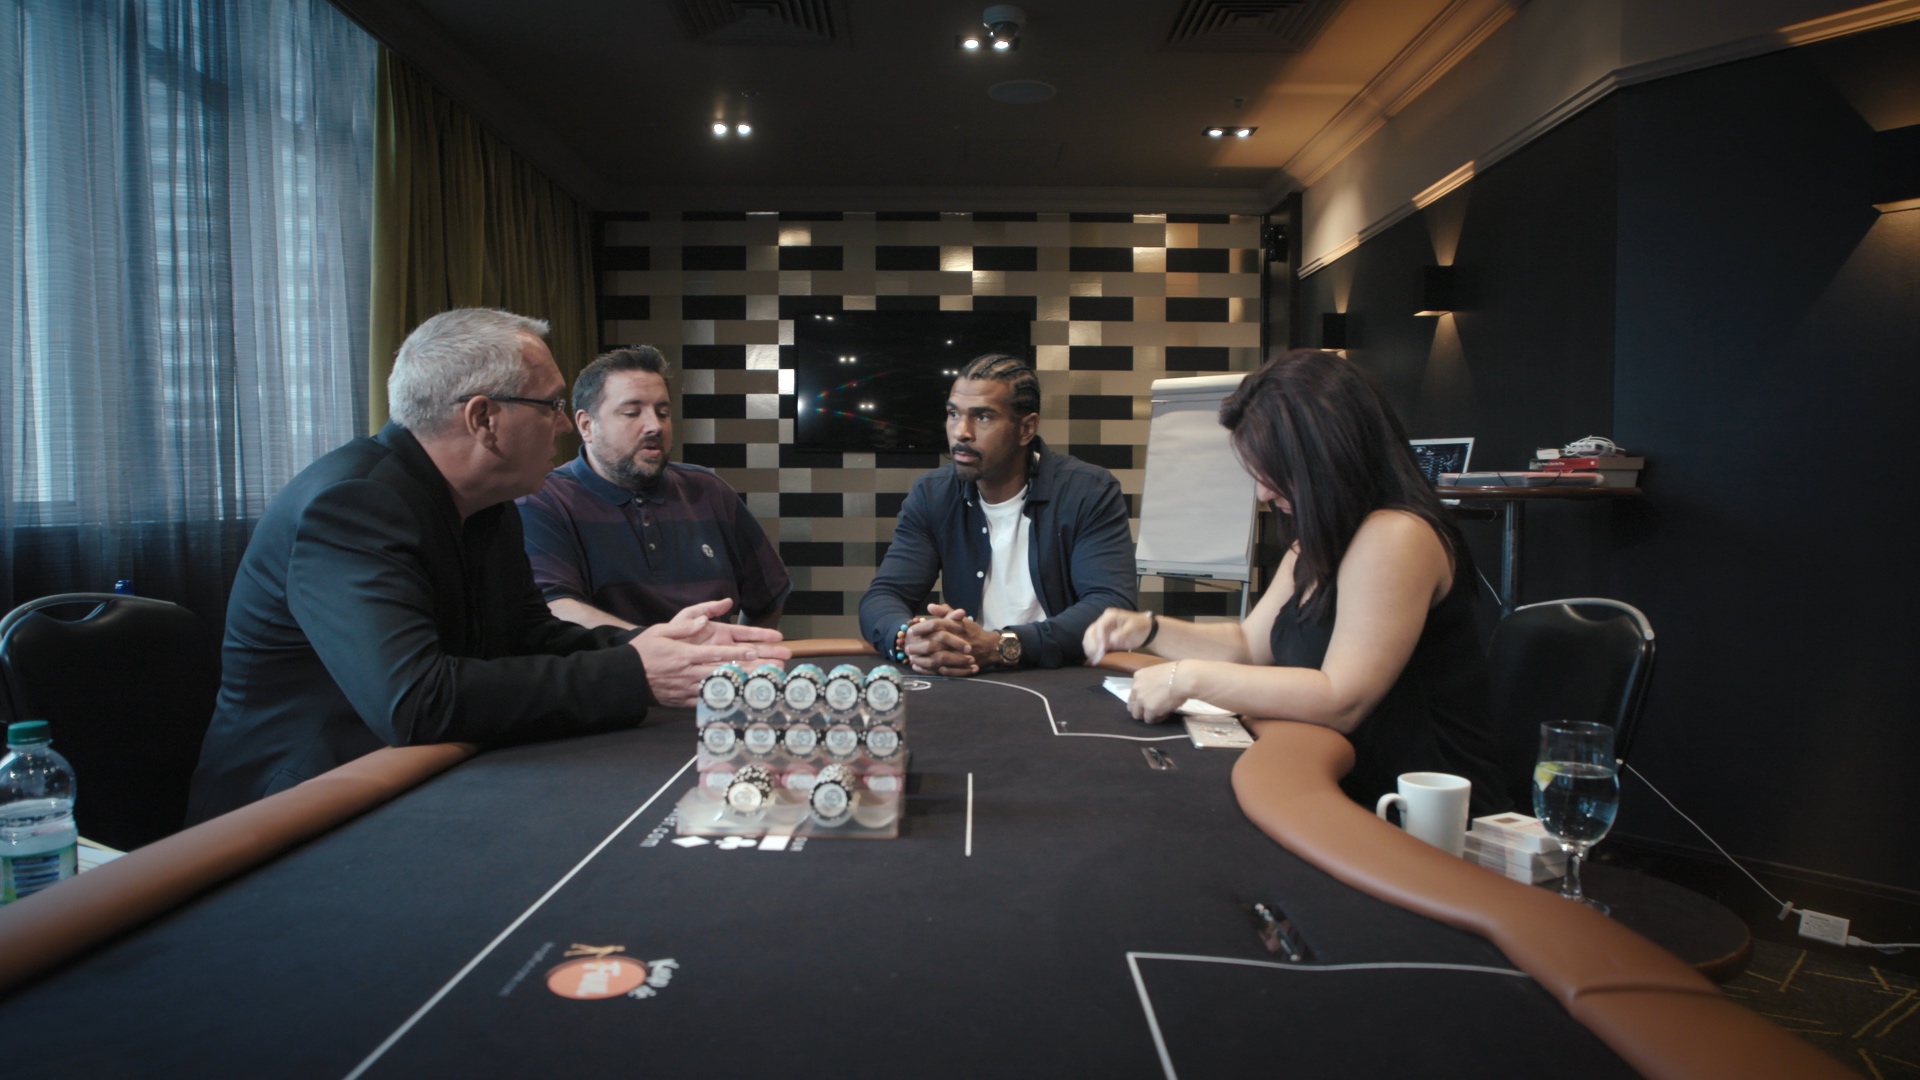 David Haye struggled to get to grips with poker at the start 